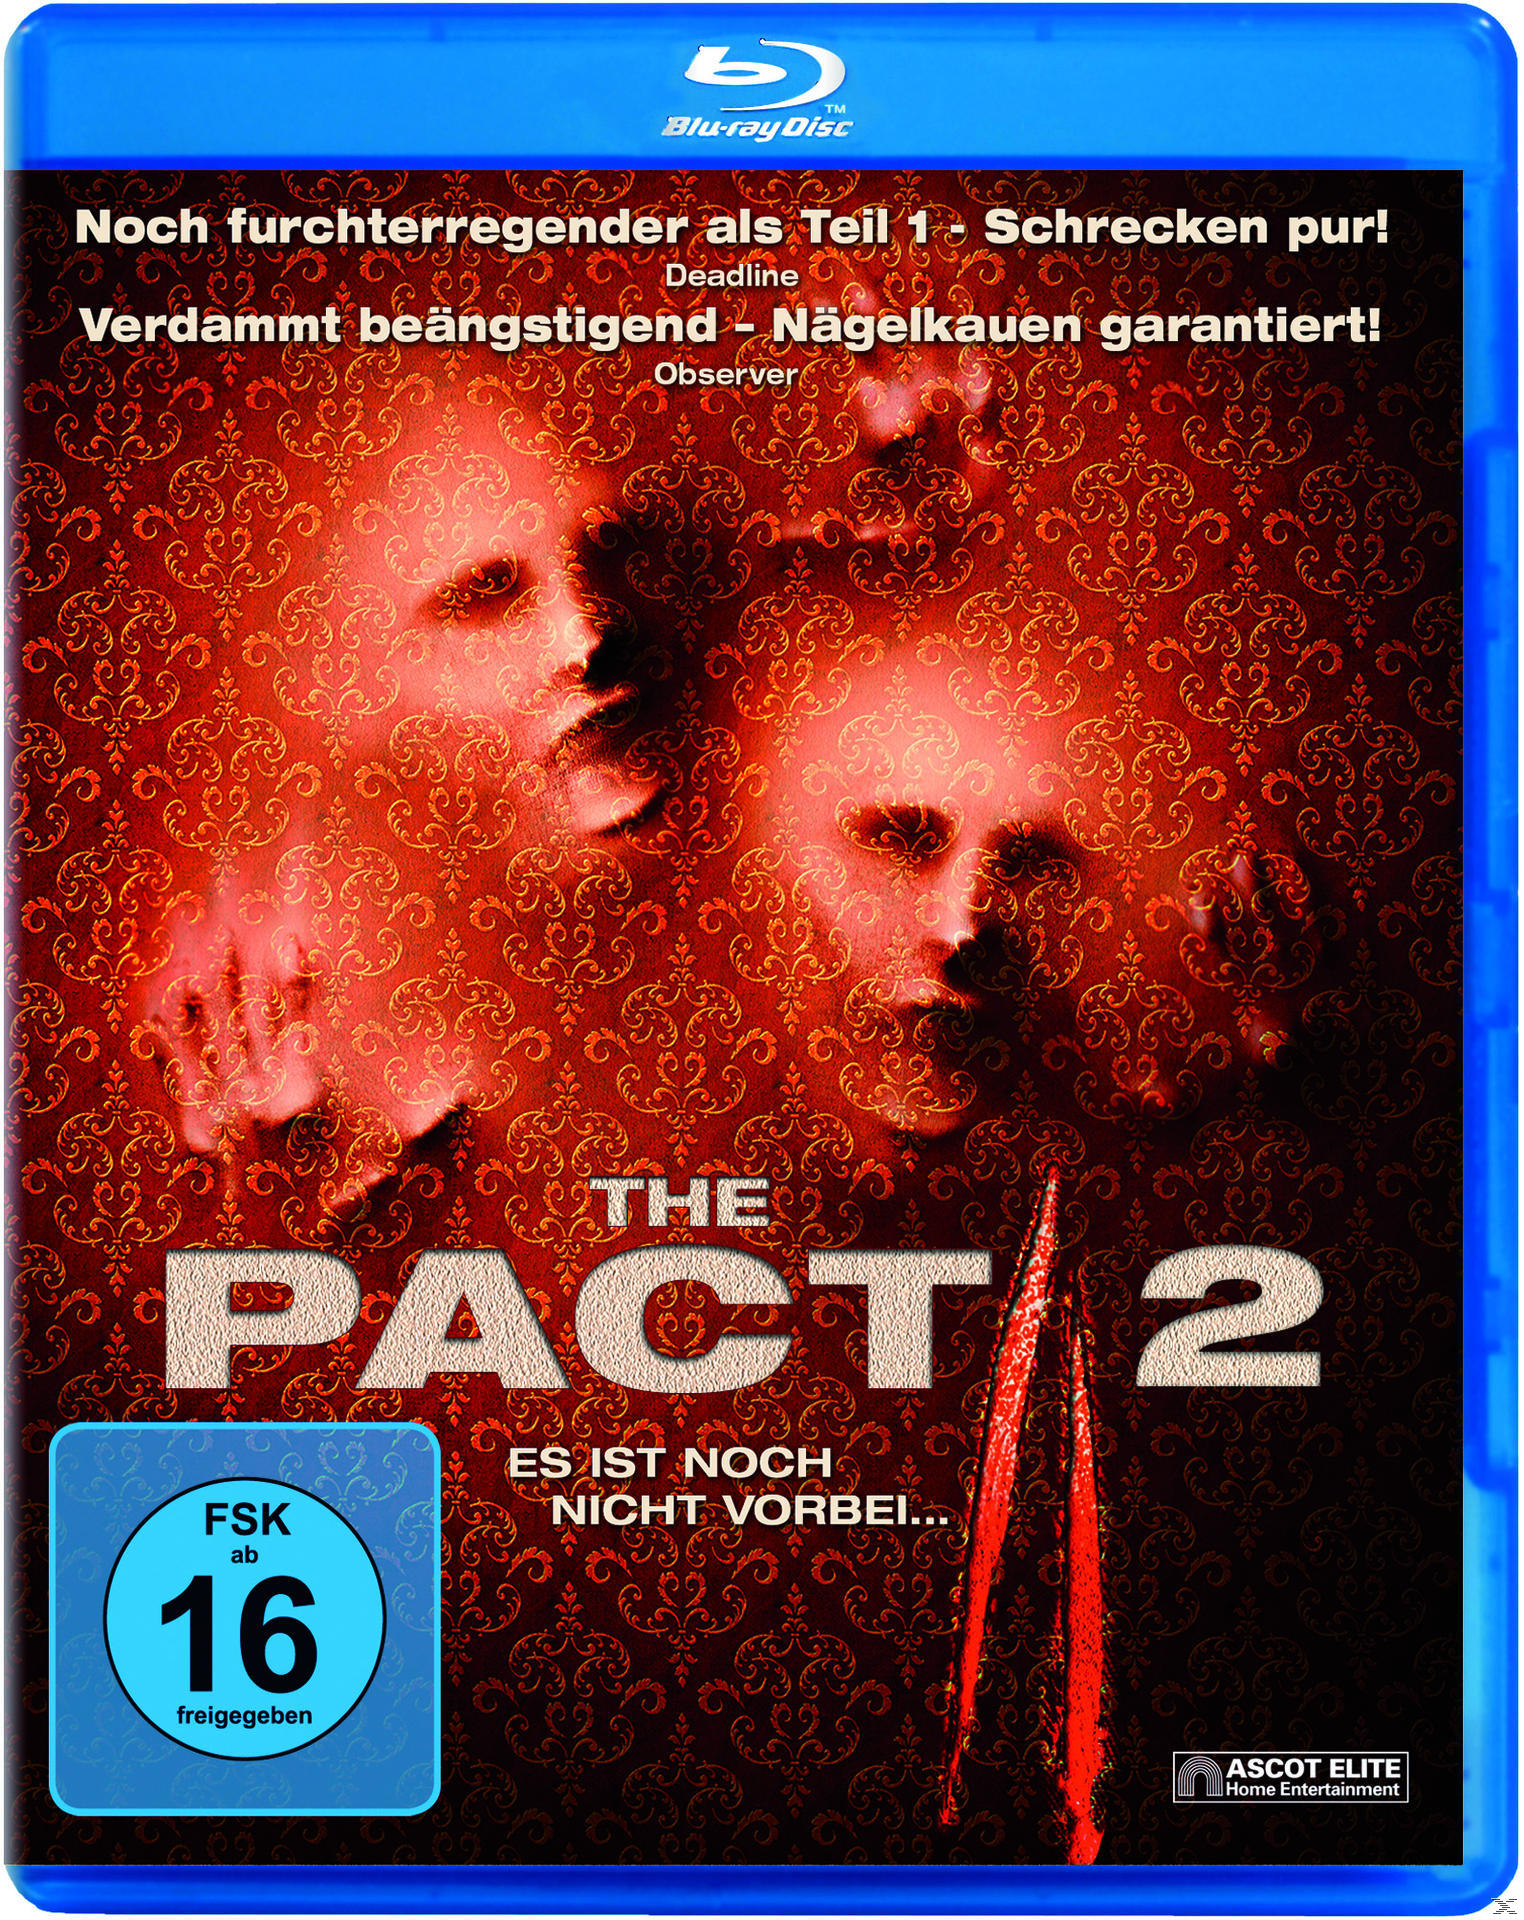 The Blu-ray 2 Pact